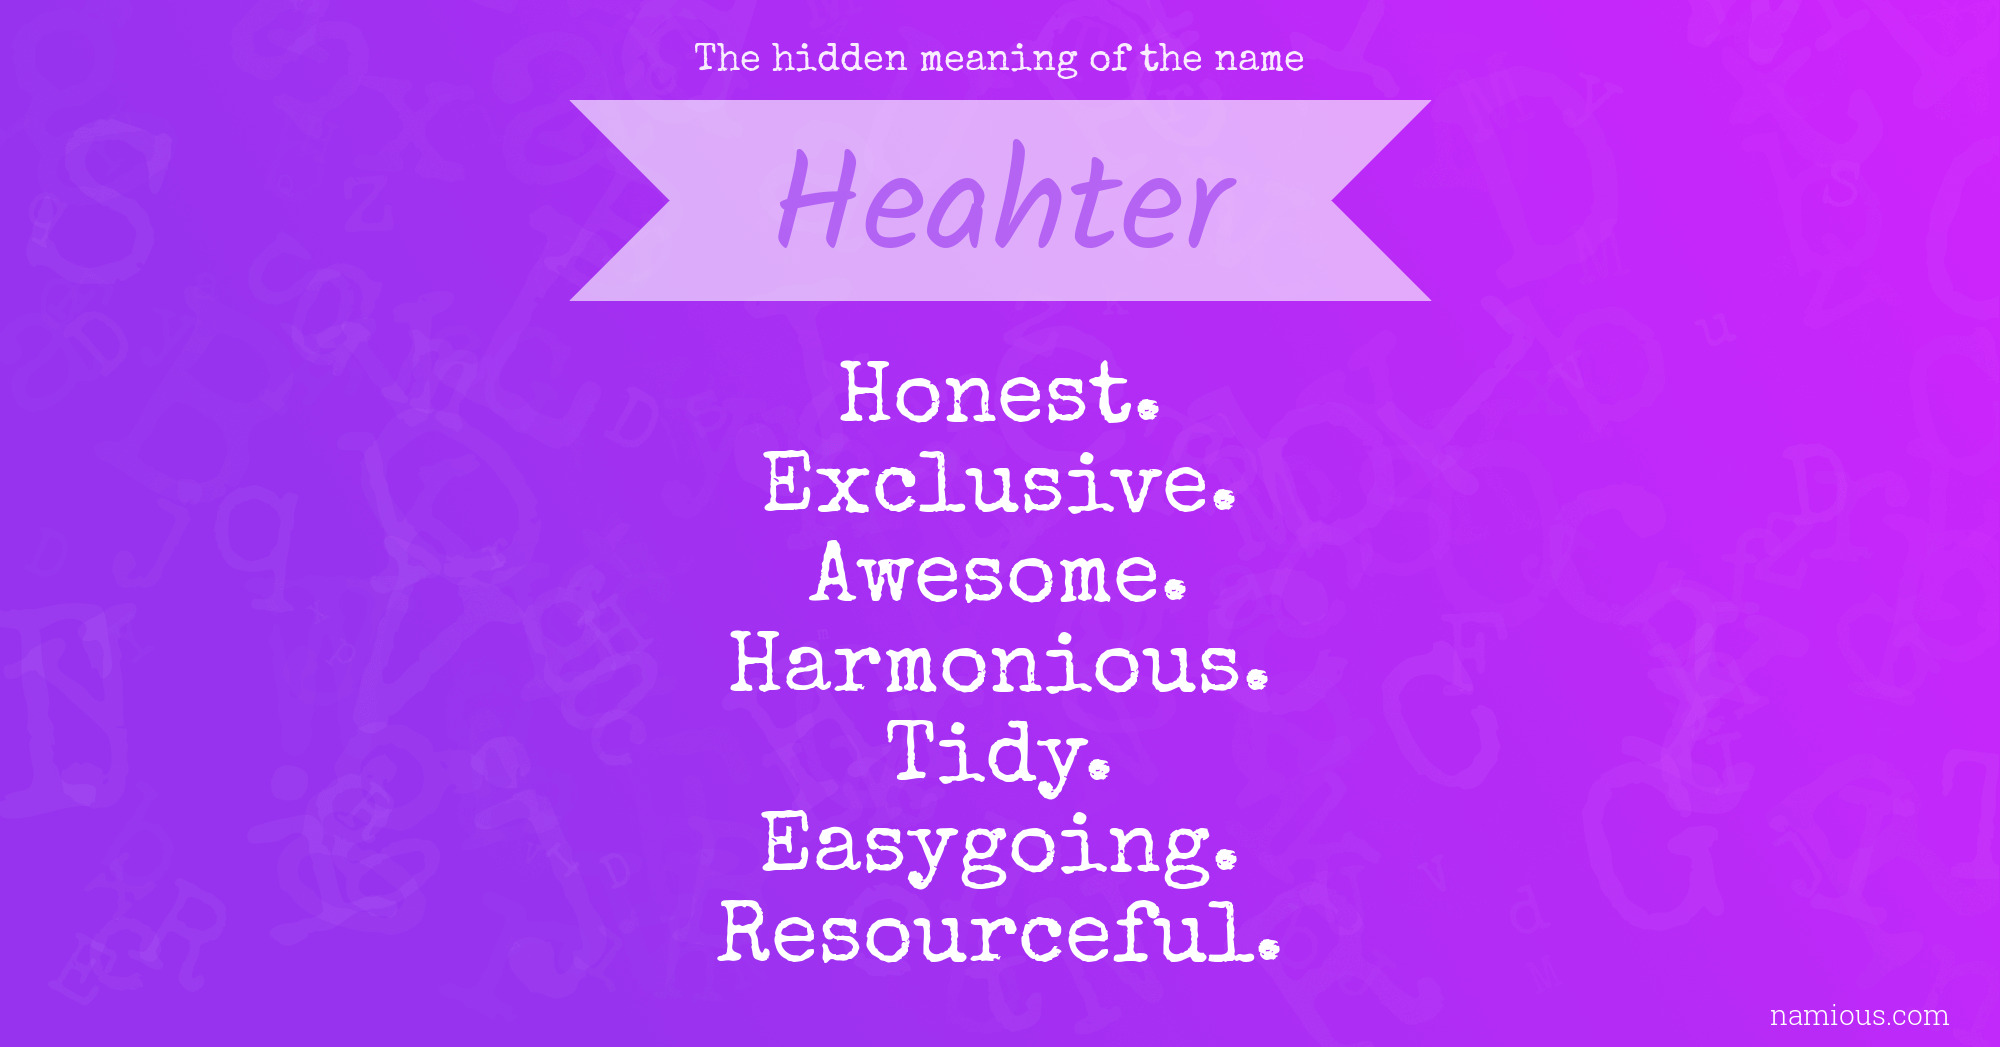 The hidden meaning of the name Heahter